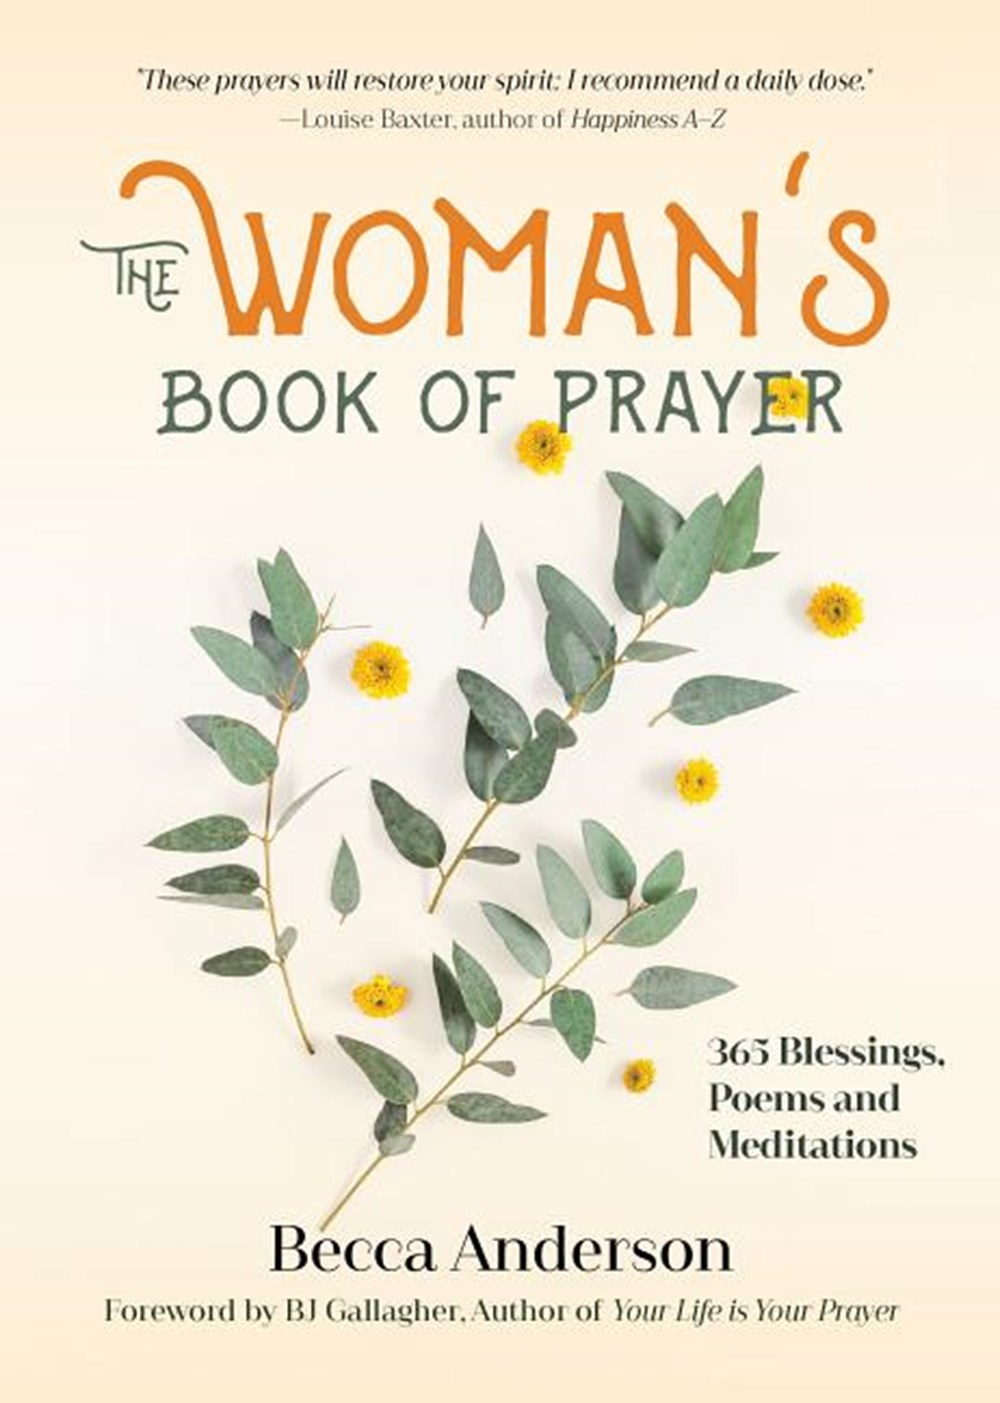 Woman's Book of Prayer: 365 Blessings, Poems and Meditations (Christian Gift for Women)